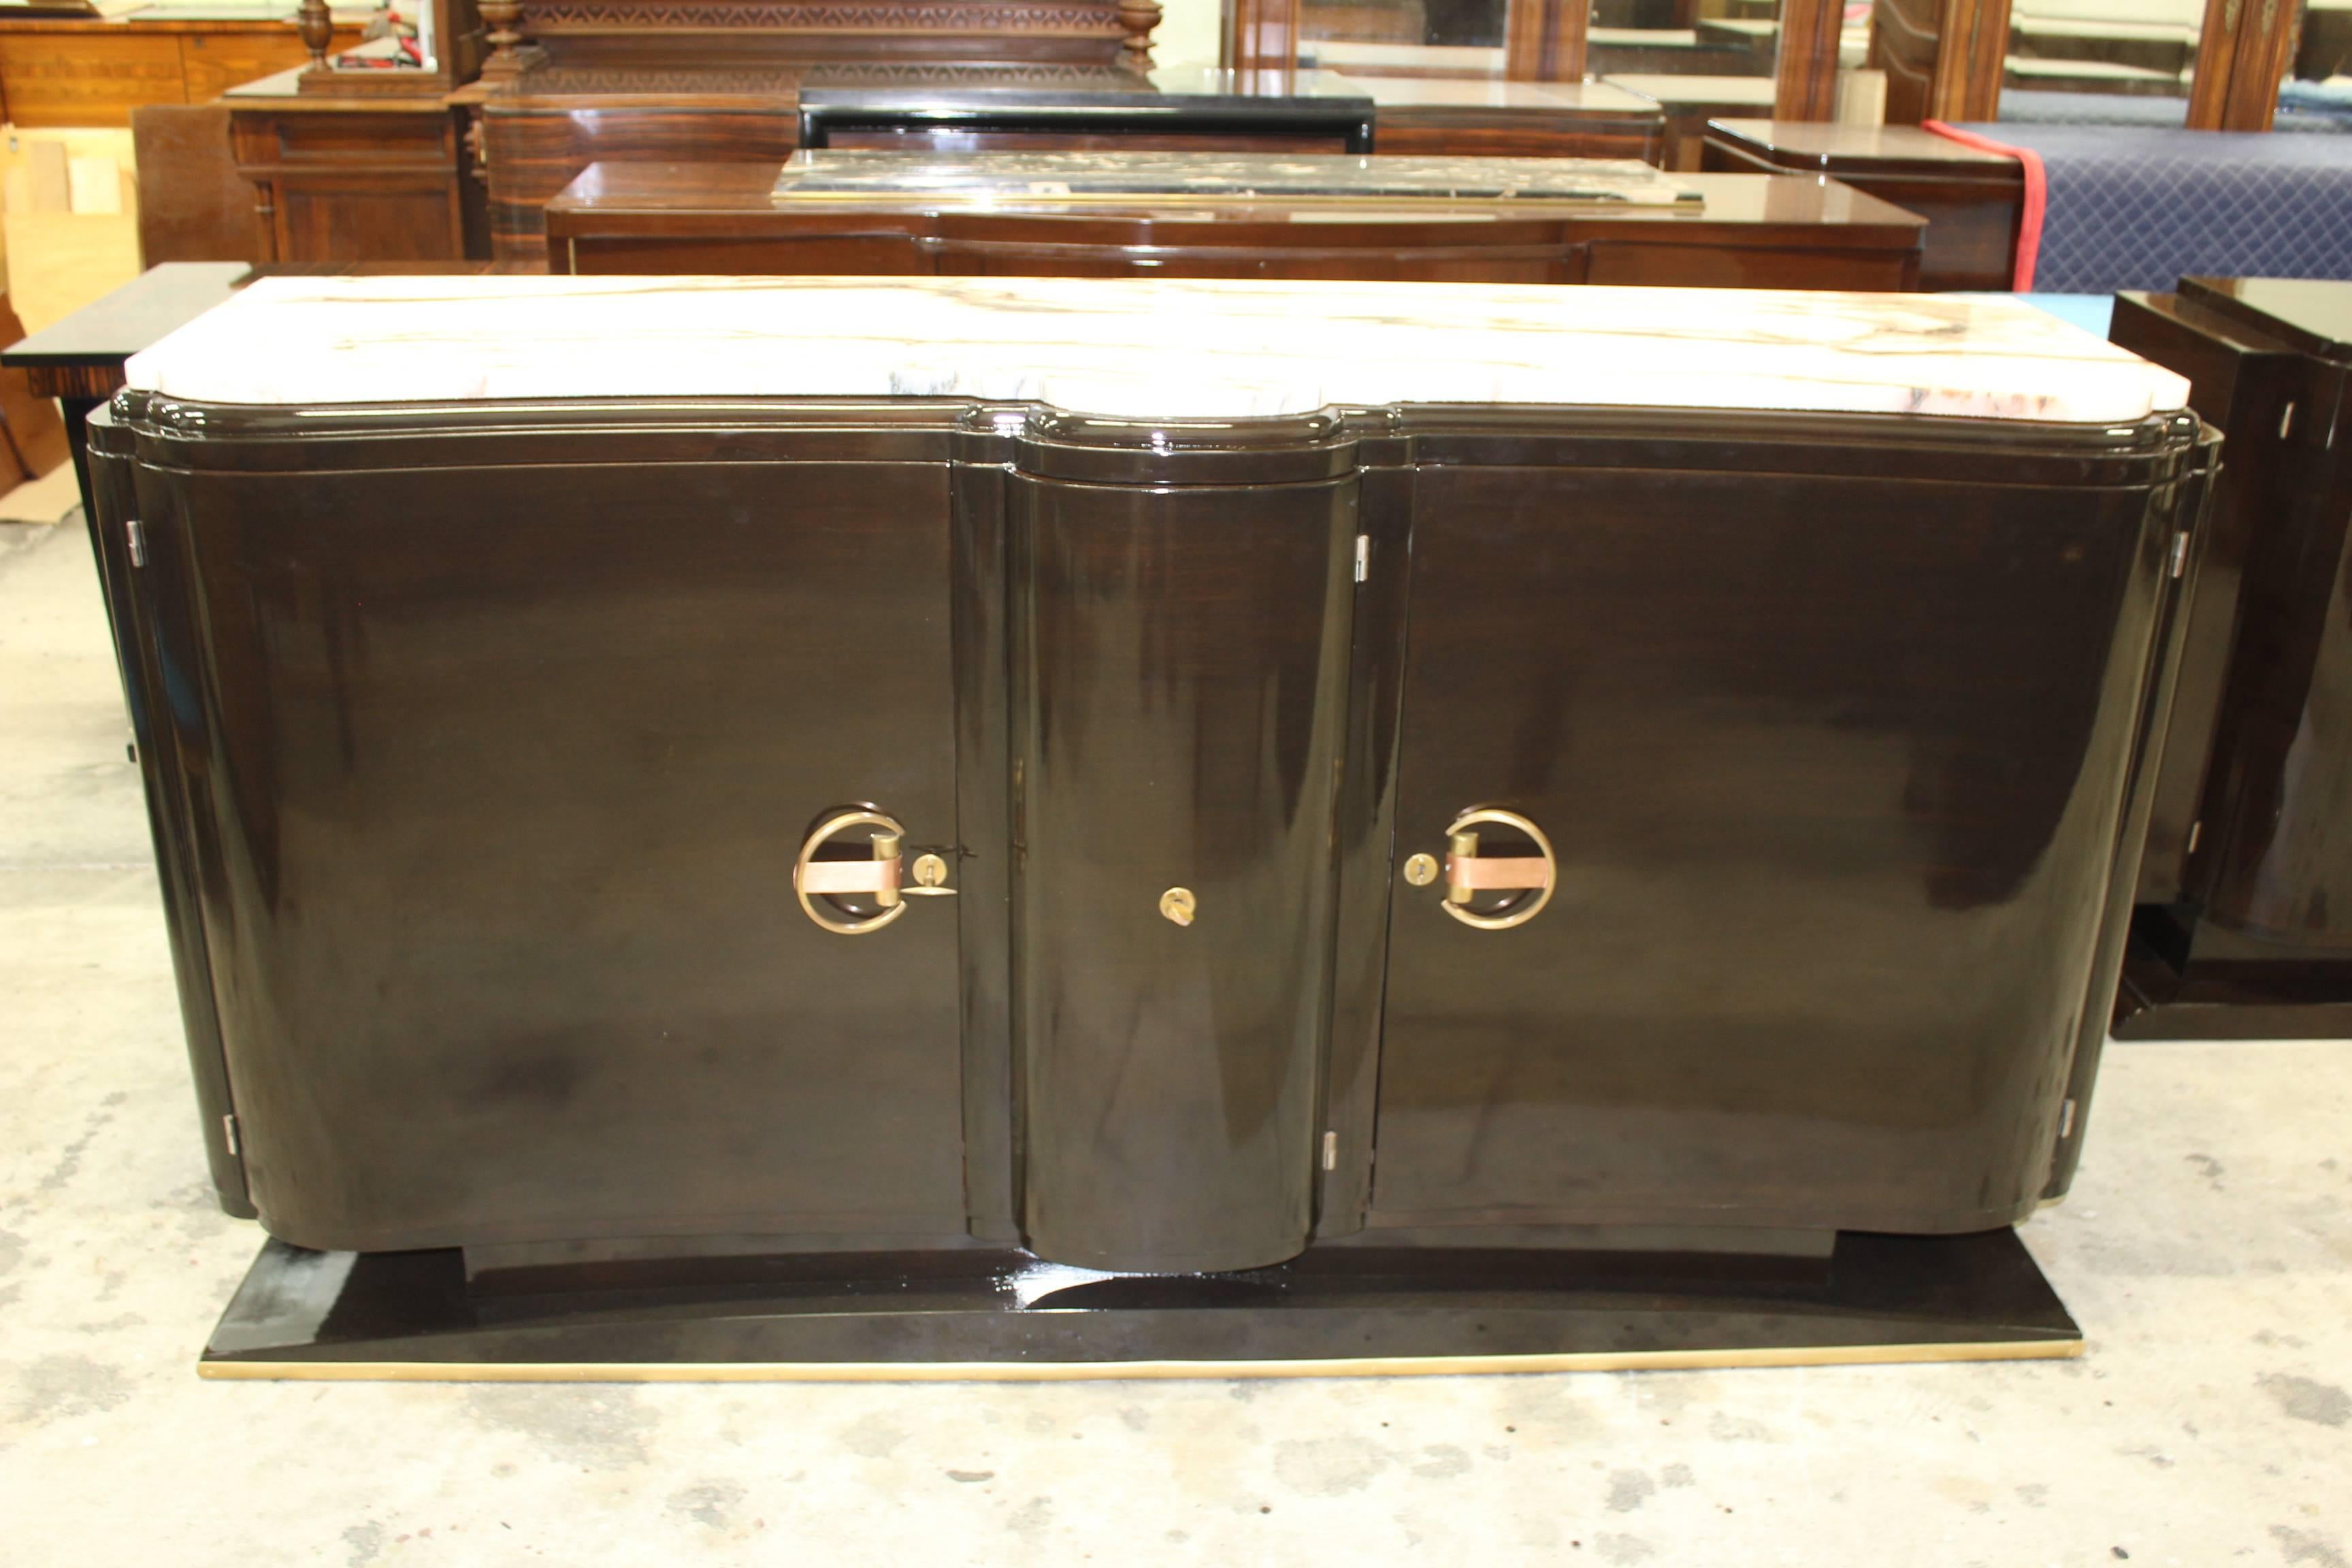 A French Art Deco dark walnut high gloss dry bar/ buffet, circa 1940s. Stunning marble top. Curved center door, elaborate hardware. Newly refinished and lacquered. Glass shelves in the left and right side of cabinet. Another French Art Deco